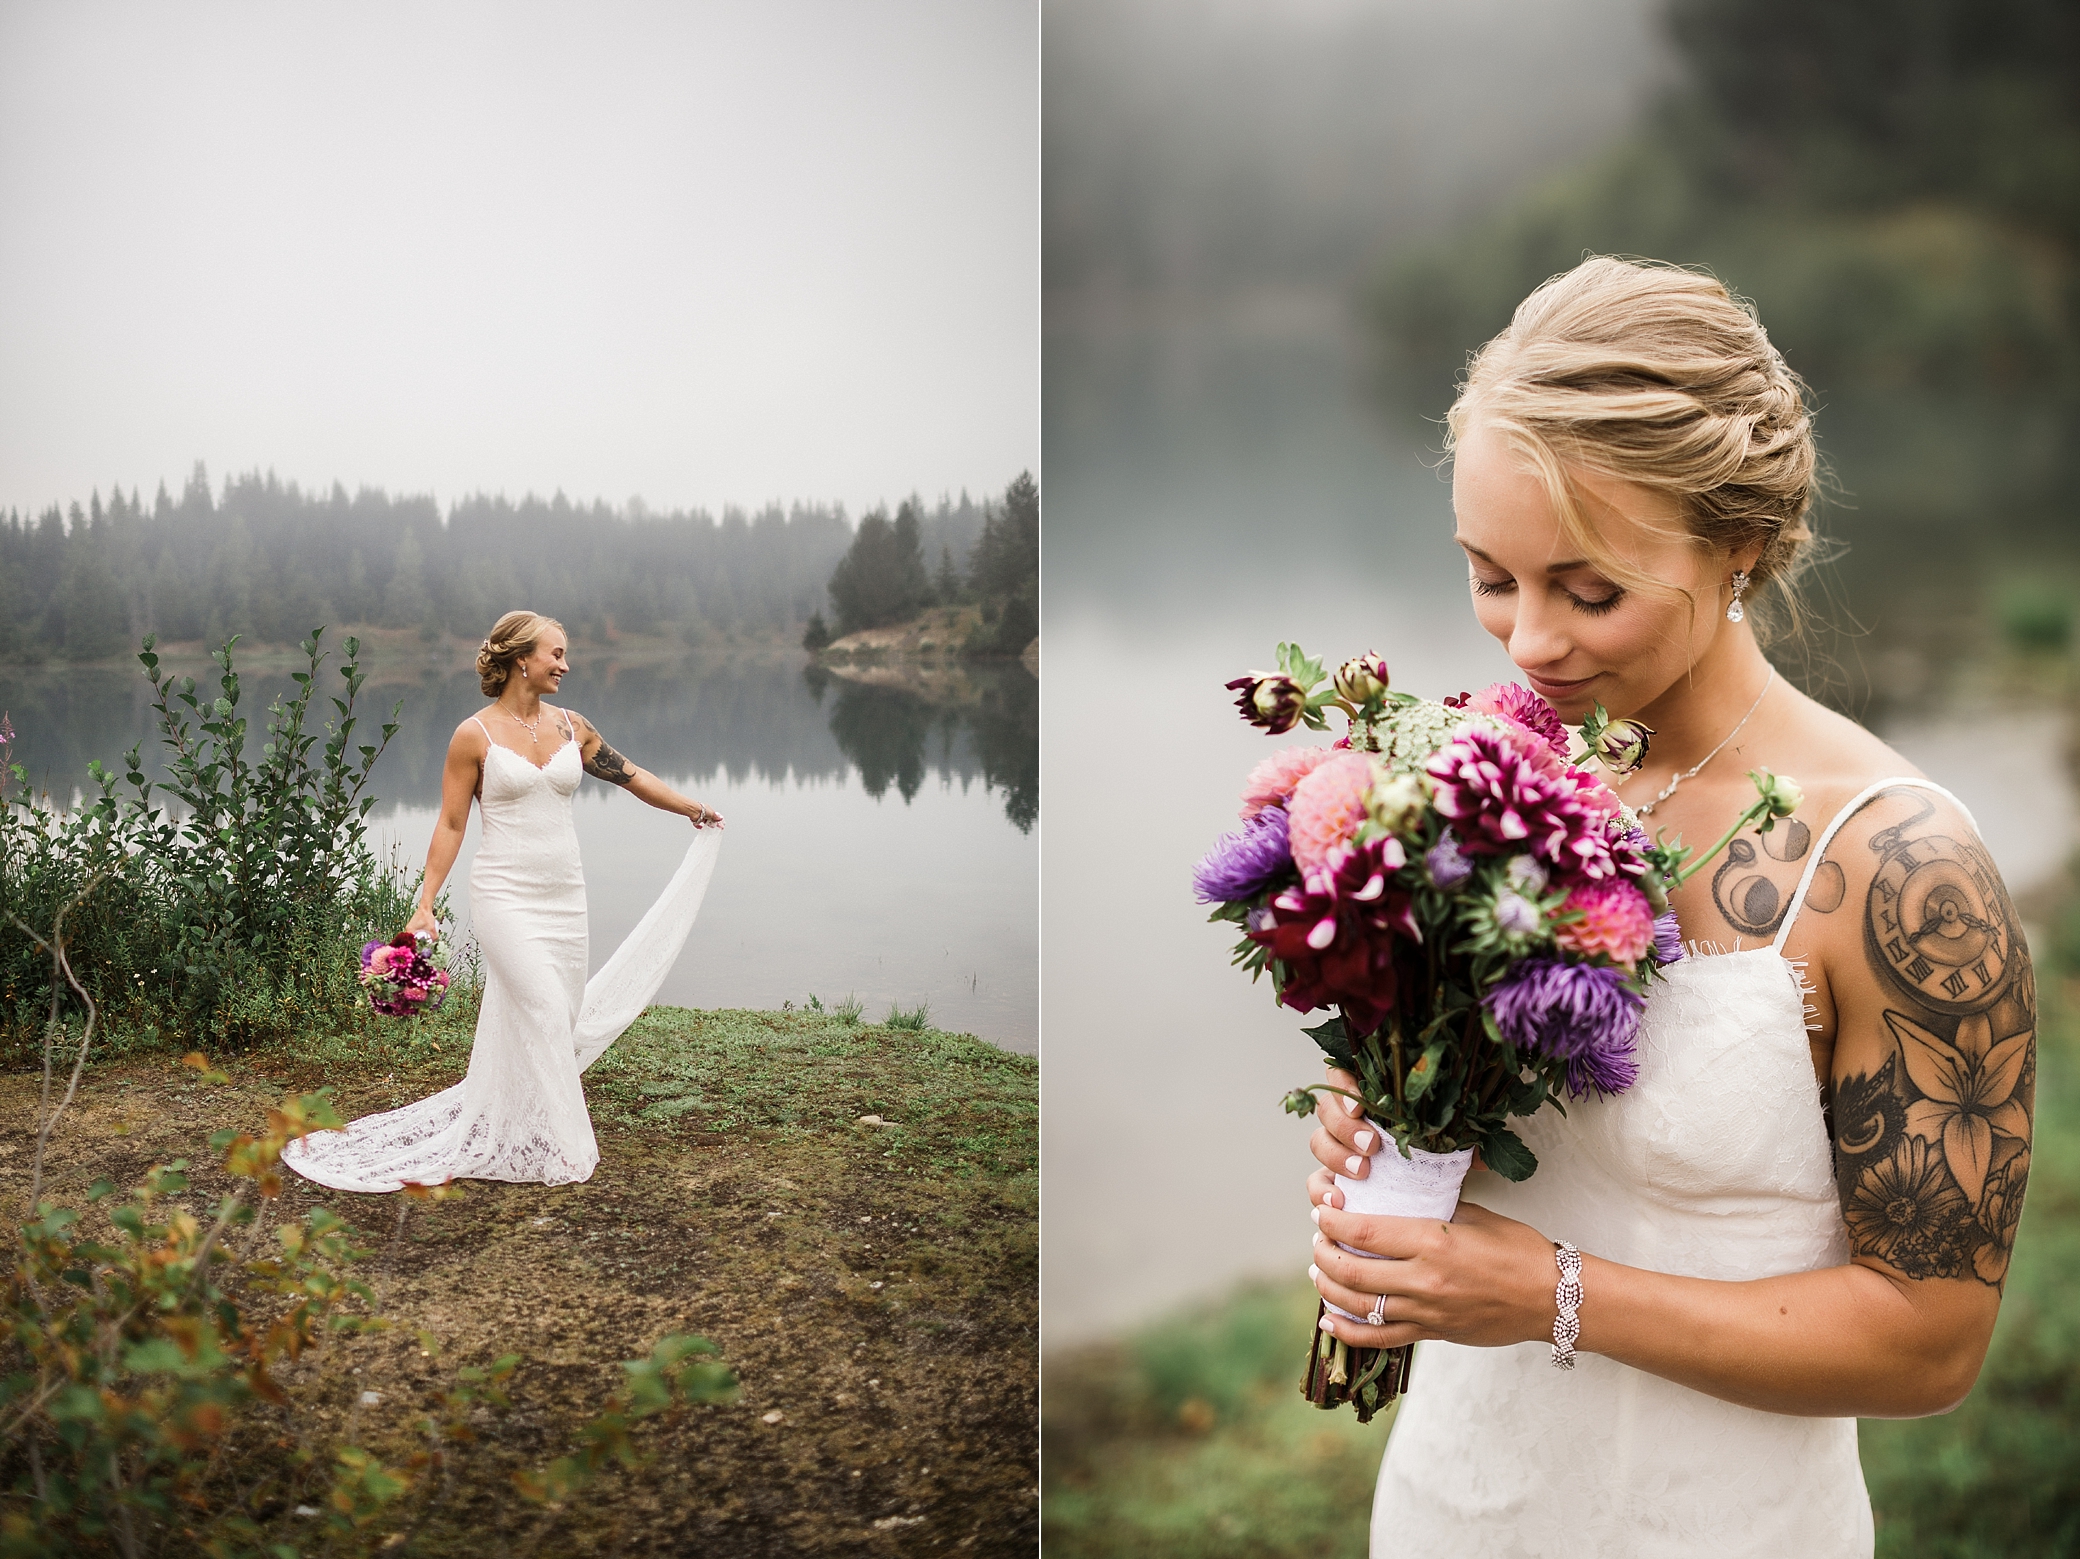 Bridal Portraits at Gold Creek Pond in Snoqualmie, WA. Photographed by Seattle Elopement and Wedding Photographer, Megan Montalvo Photography